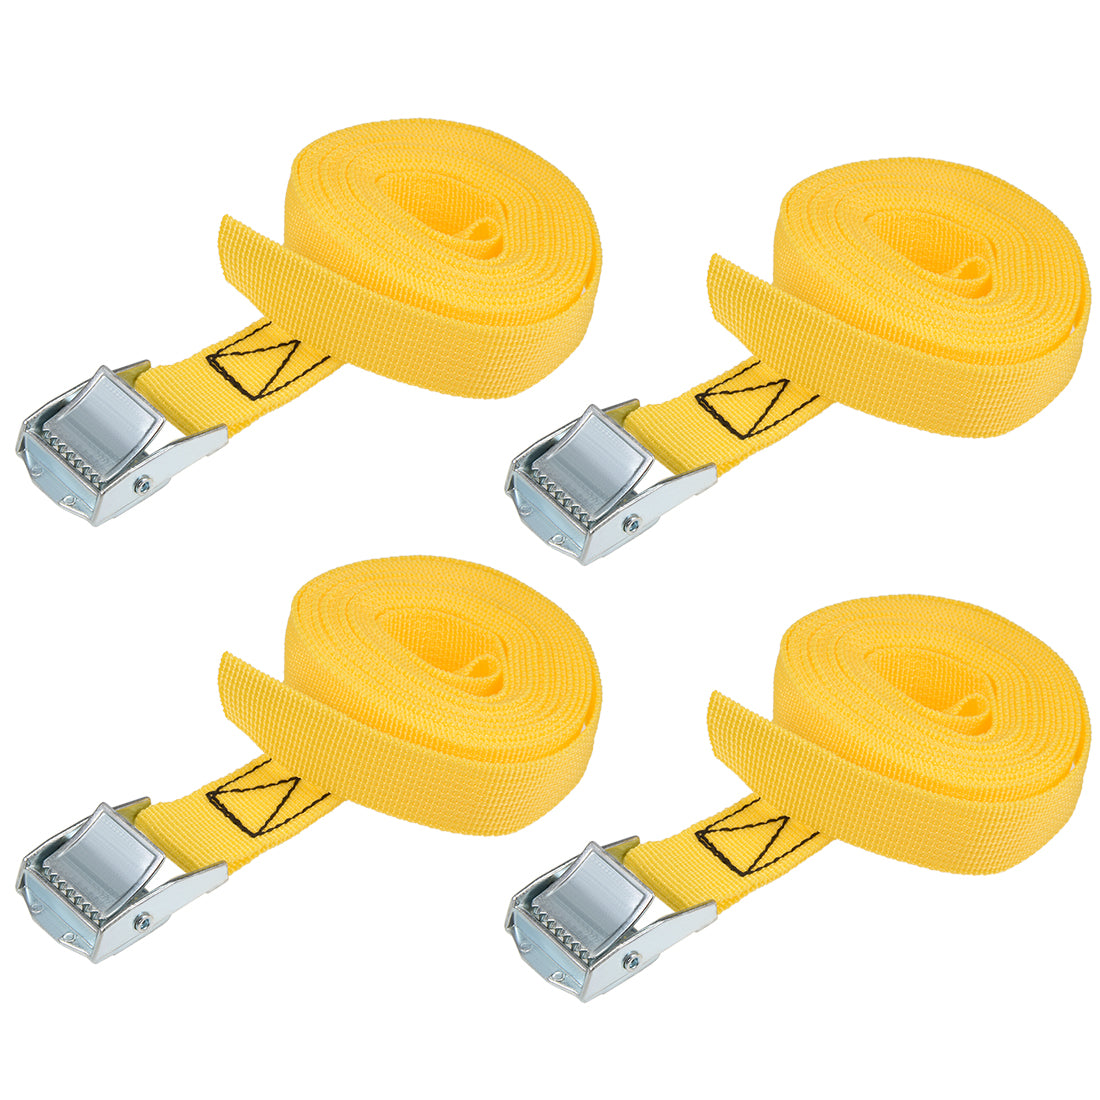 uxcell Uxcell 3Meters x 25mm Lashing Strap Cargo Tie Down Straps w Cam Lock Buckle 250Kg Work Load, Yellow, 4Pcs